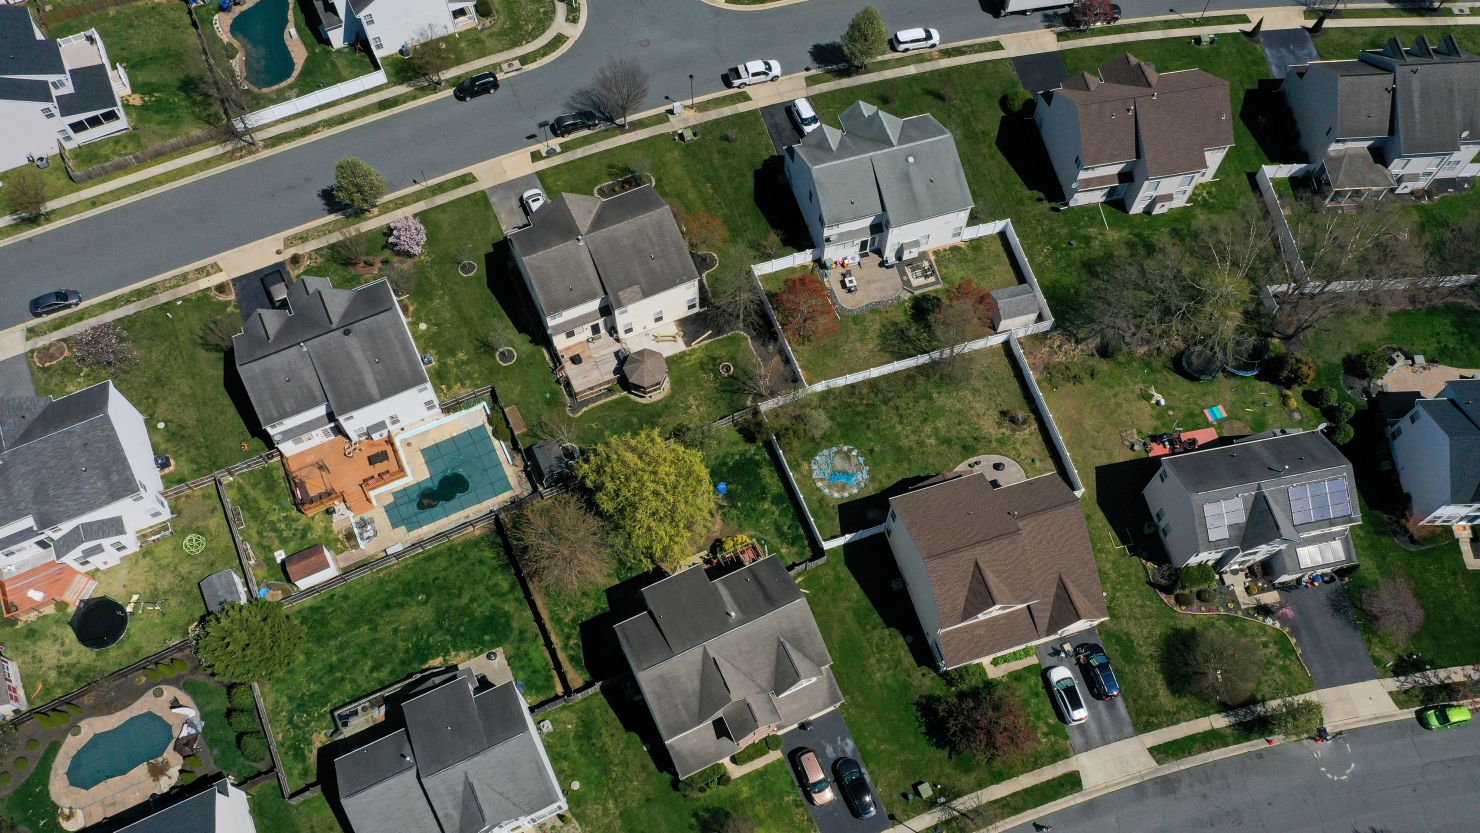 Homes in Centreville, Maryland, US, on Tuesday, April 4, 2023.